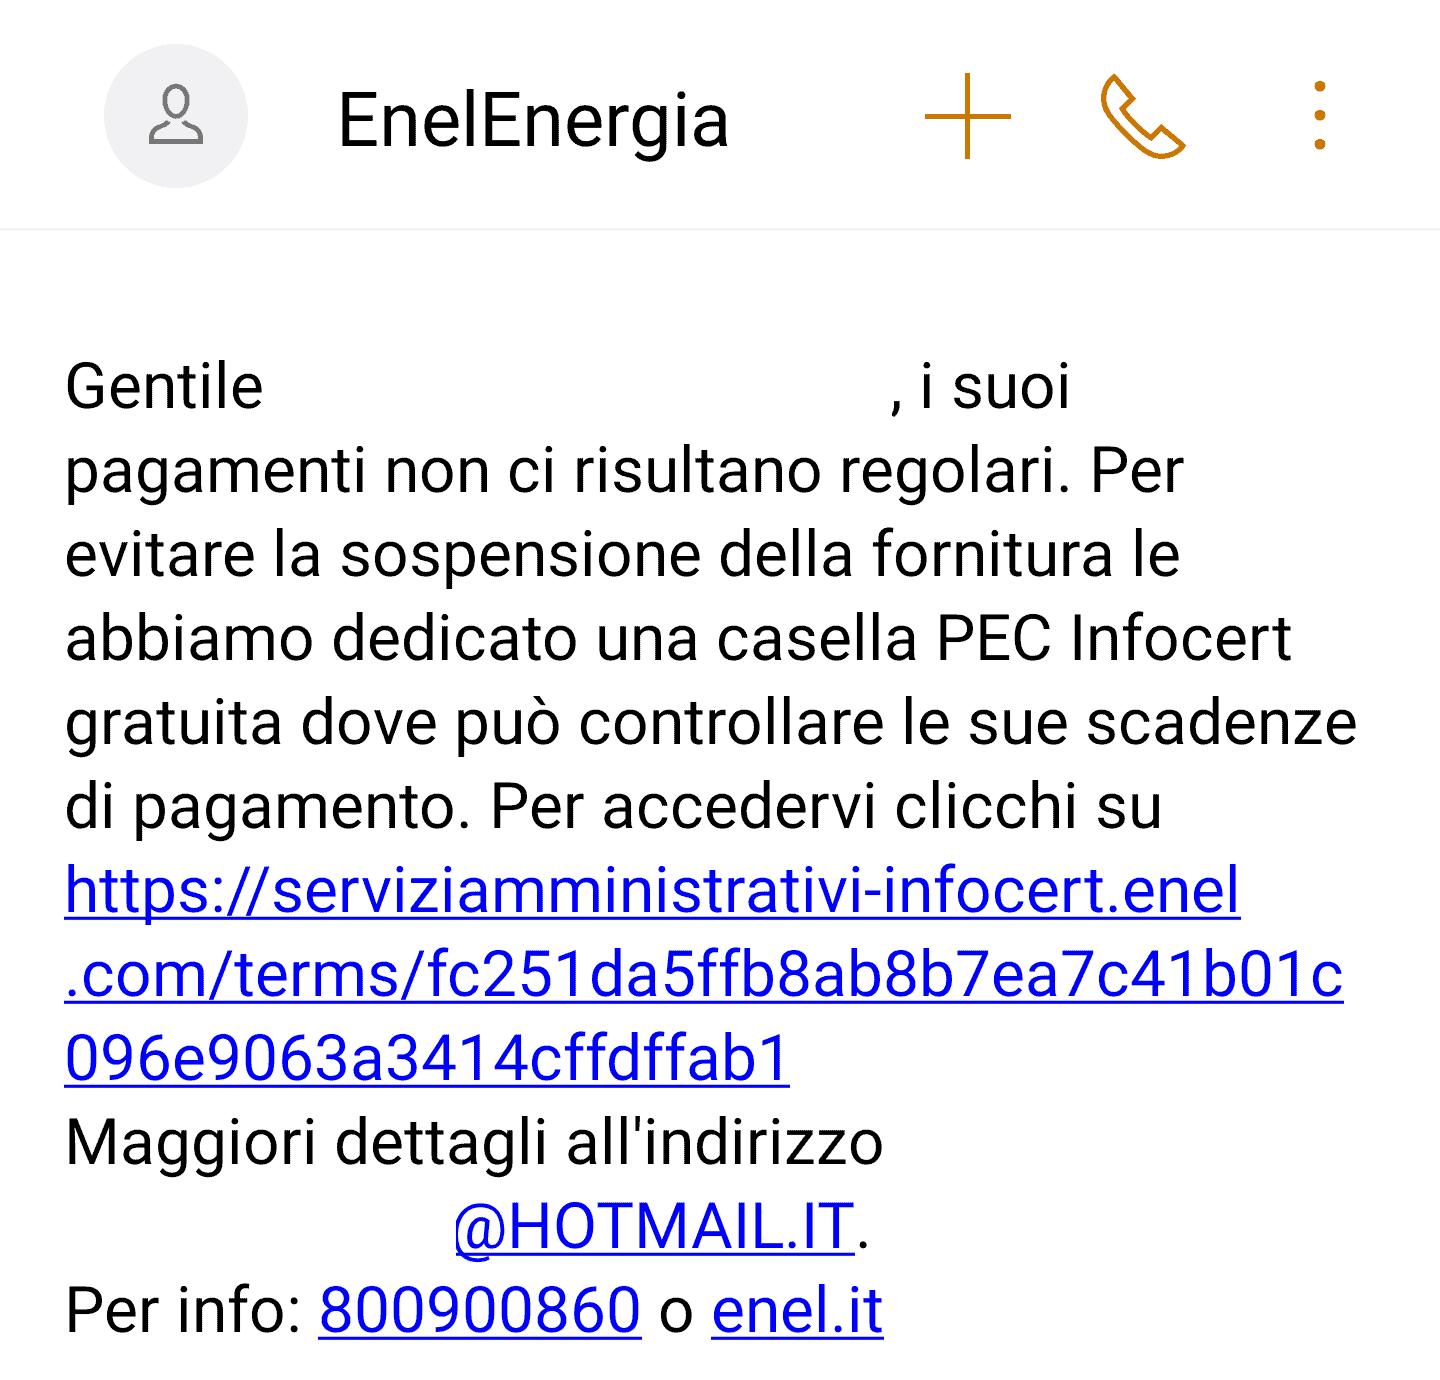 Sms di phishing a nome Enel